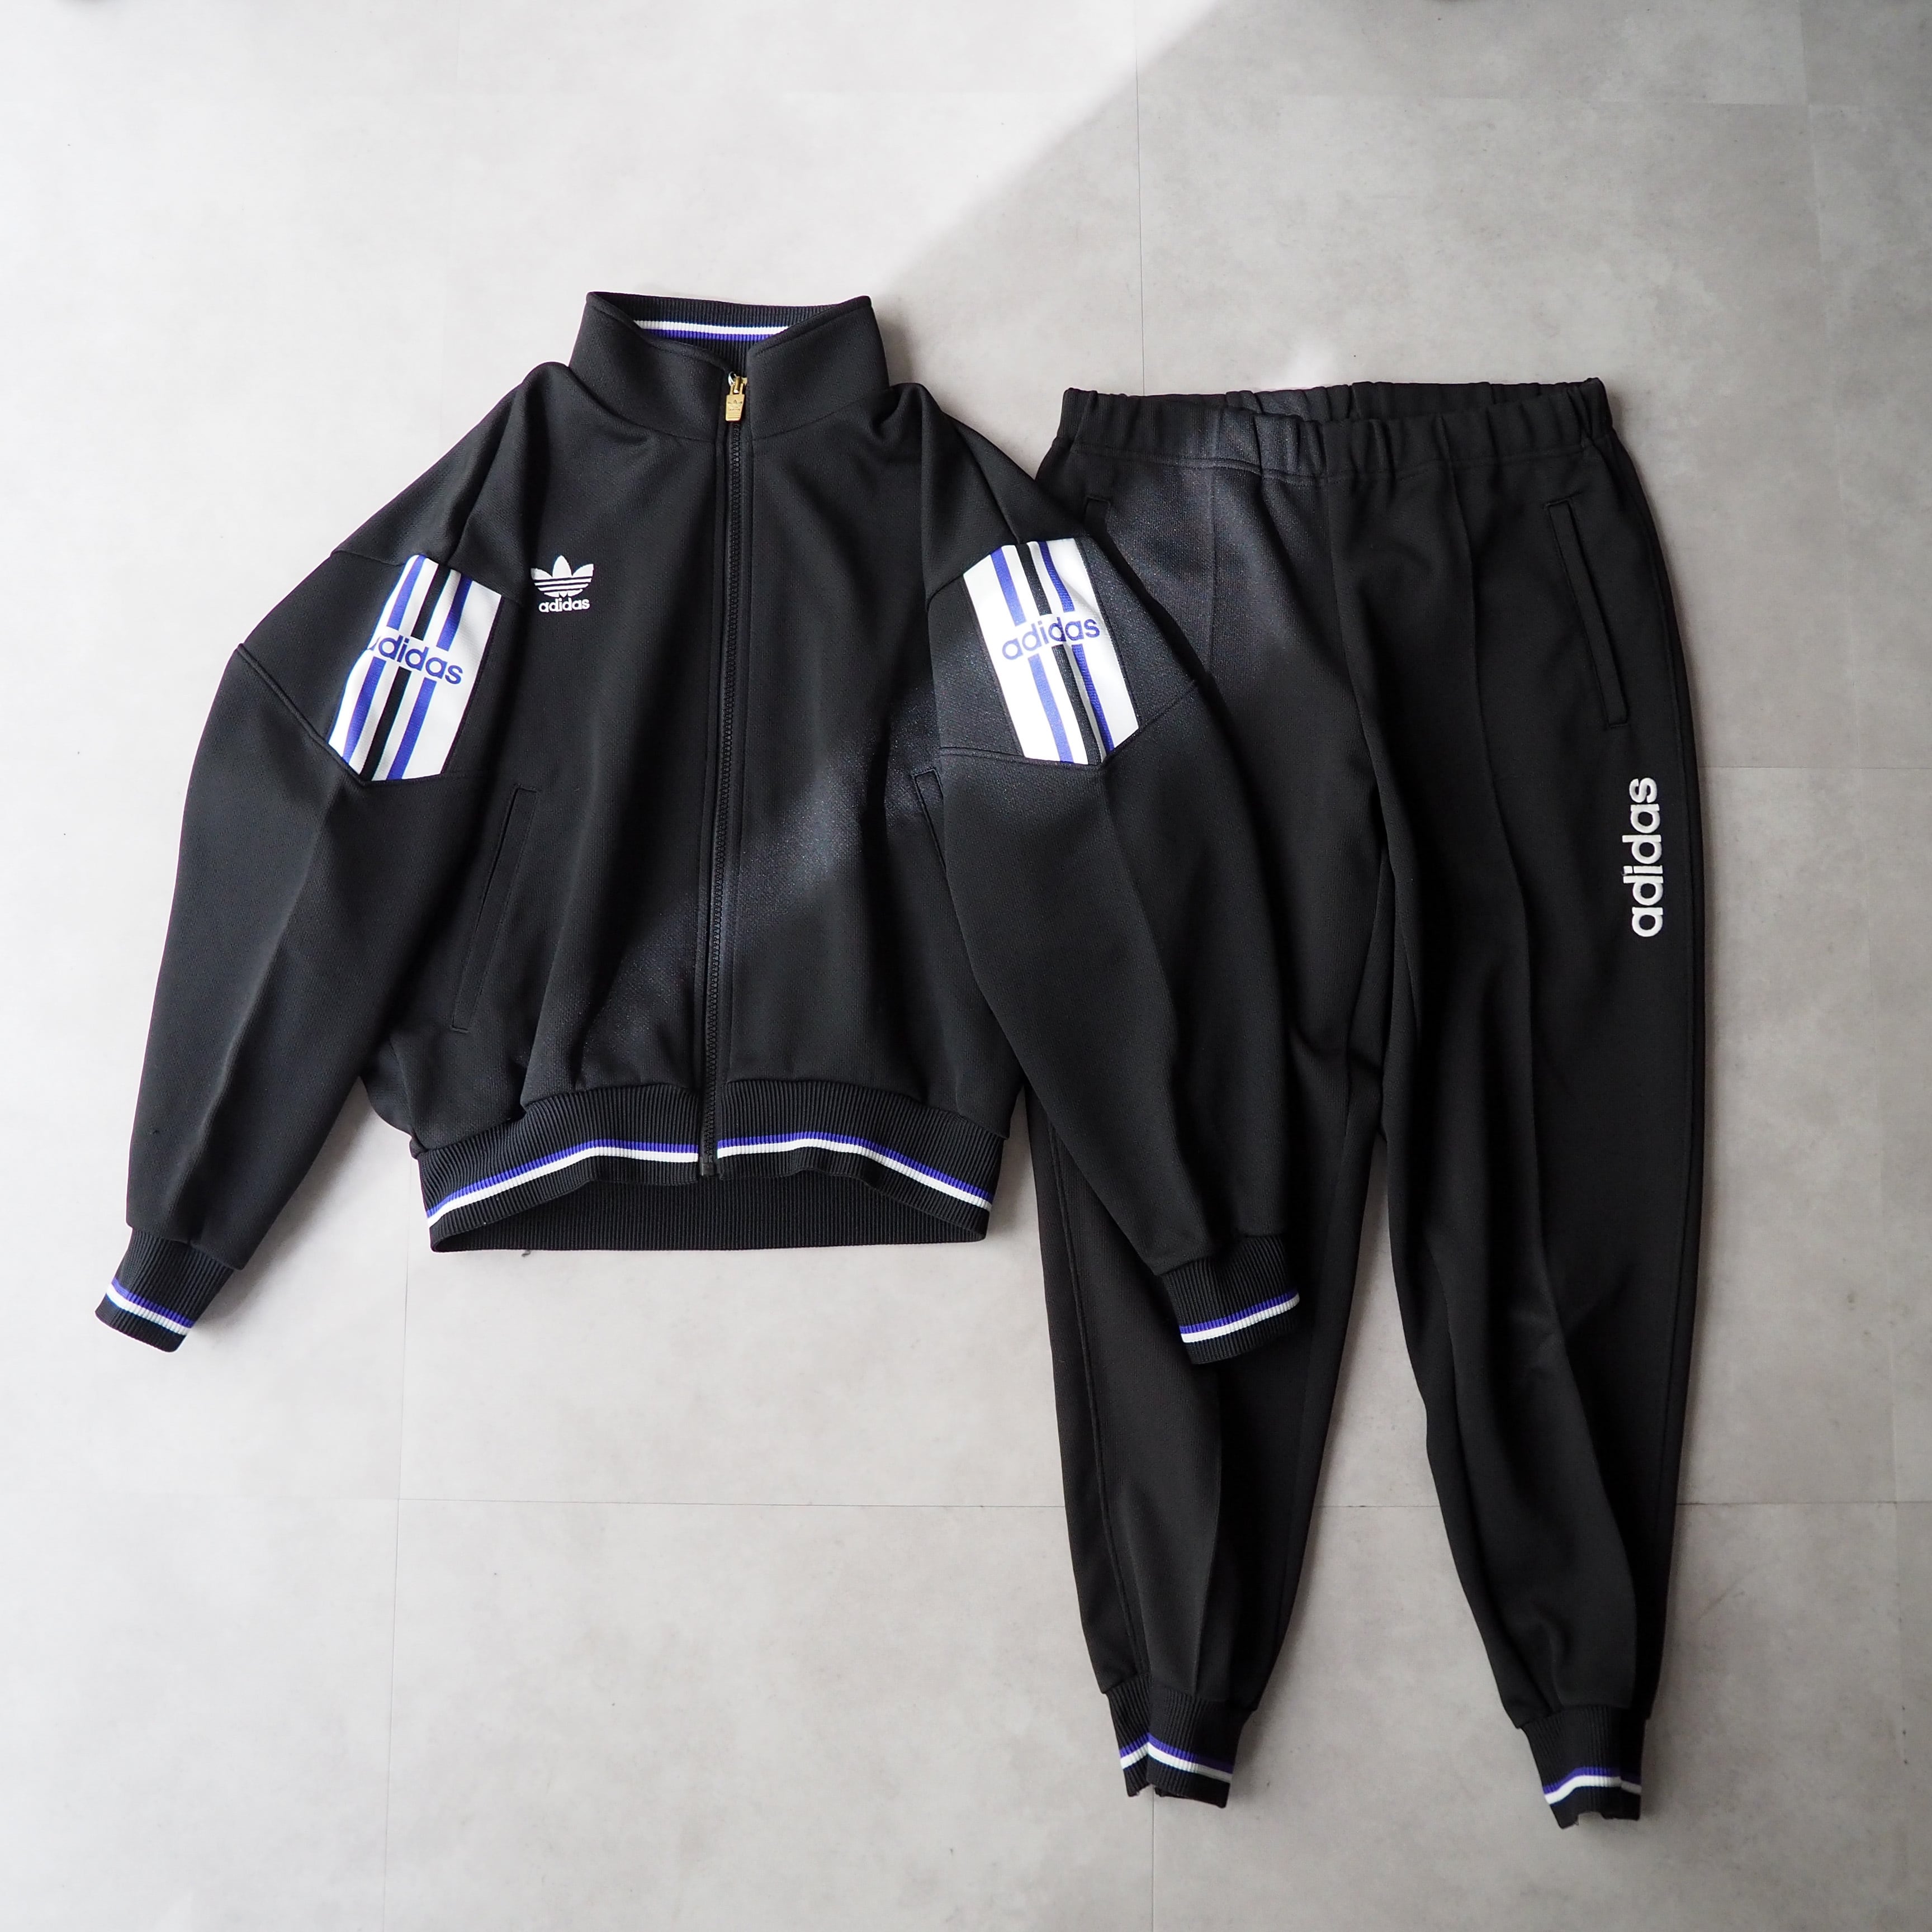 80s-90s “ADIDAS” by DESCENTE track jacket & pants set up 80